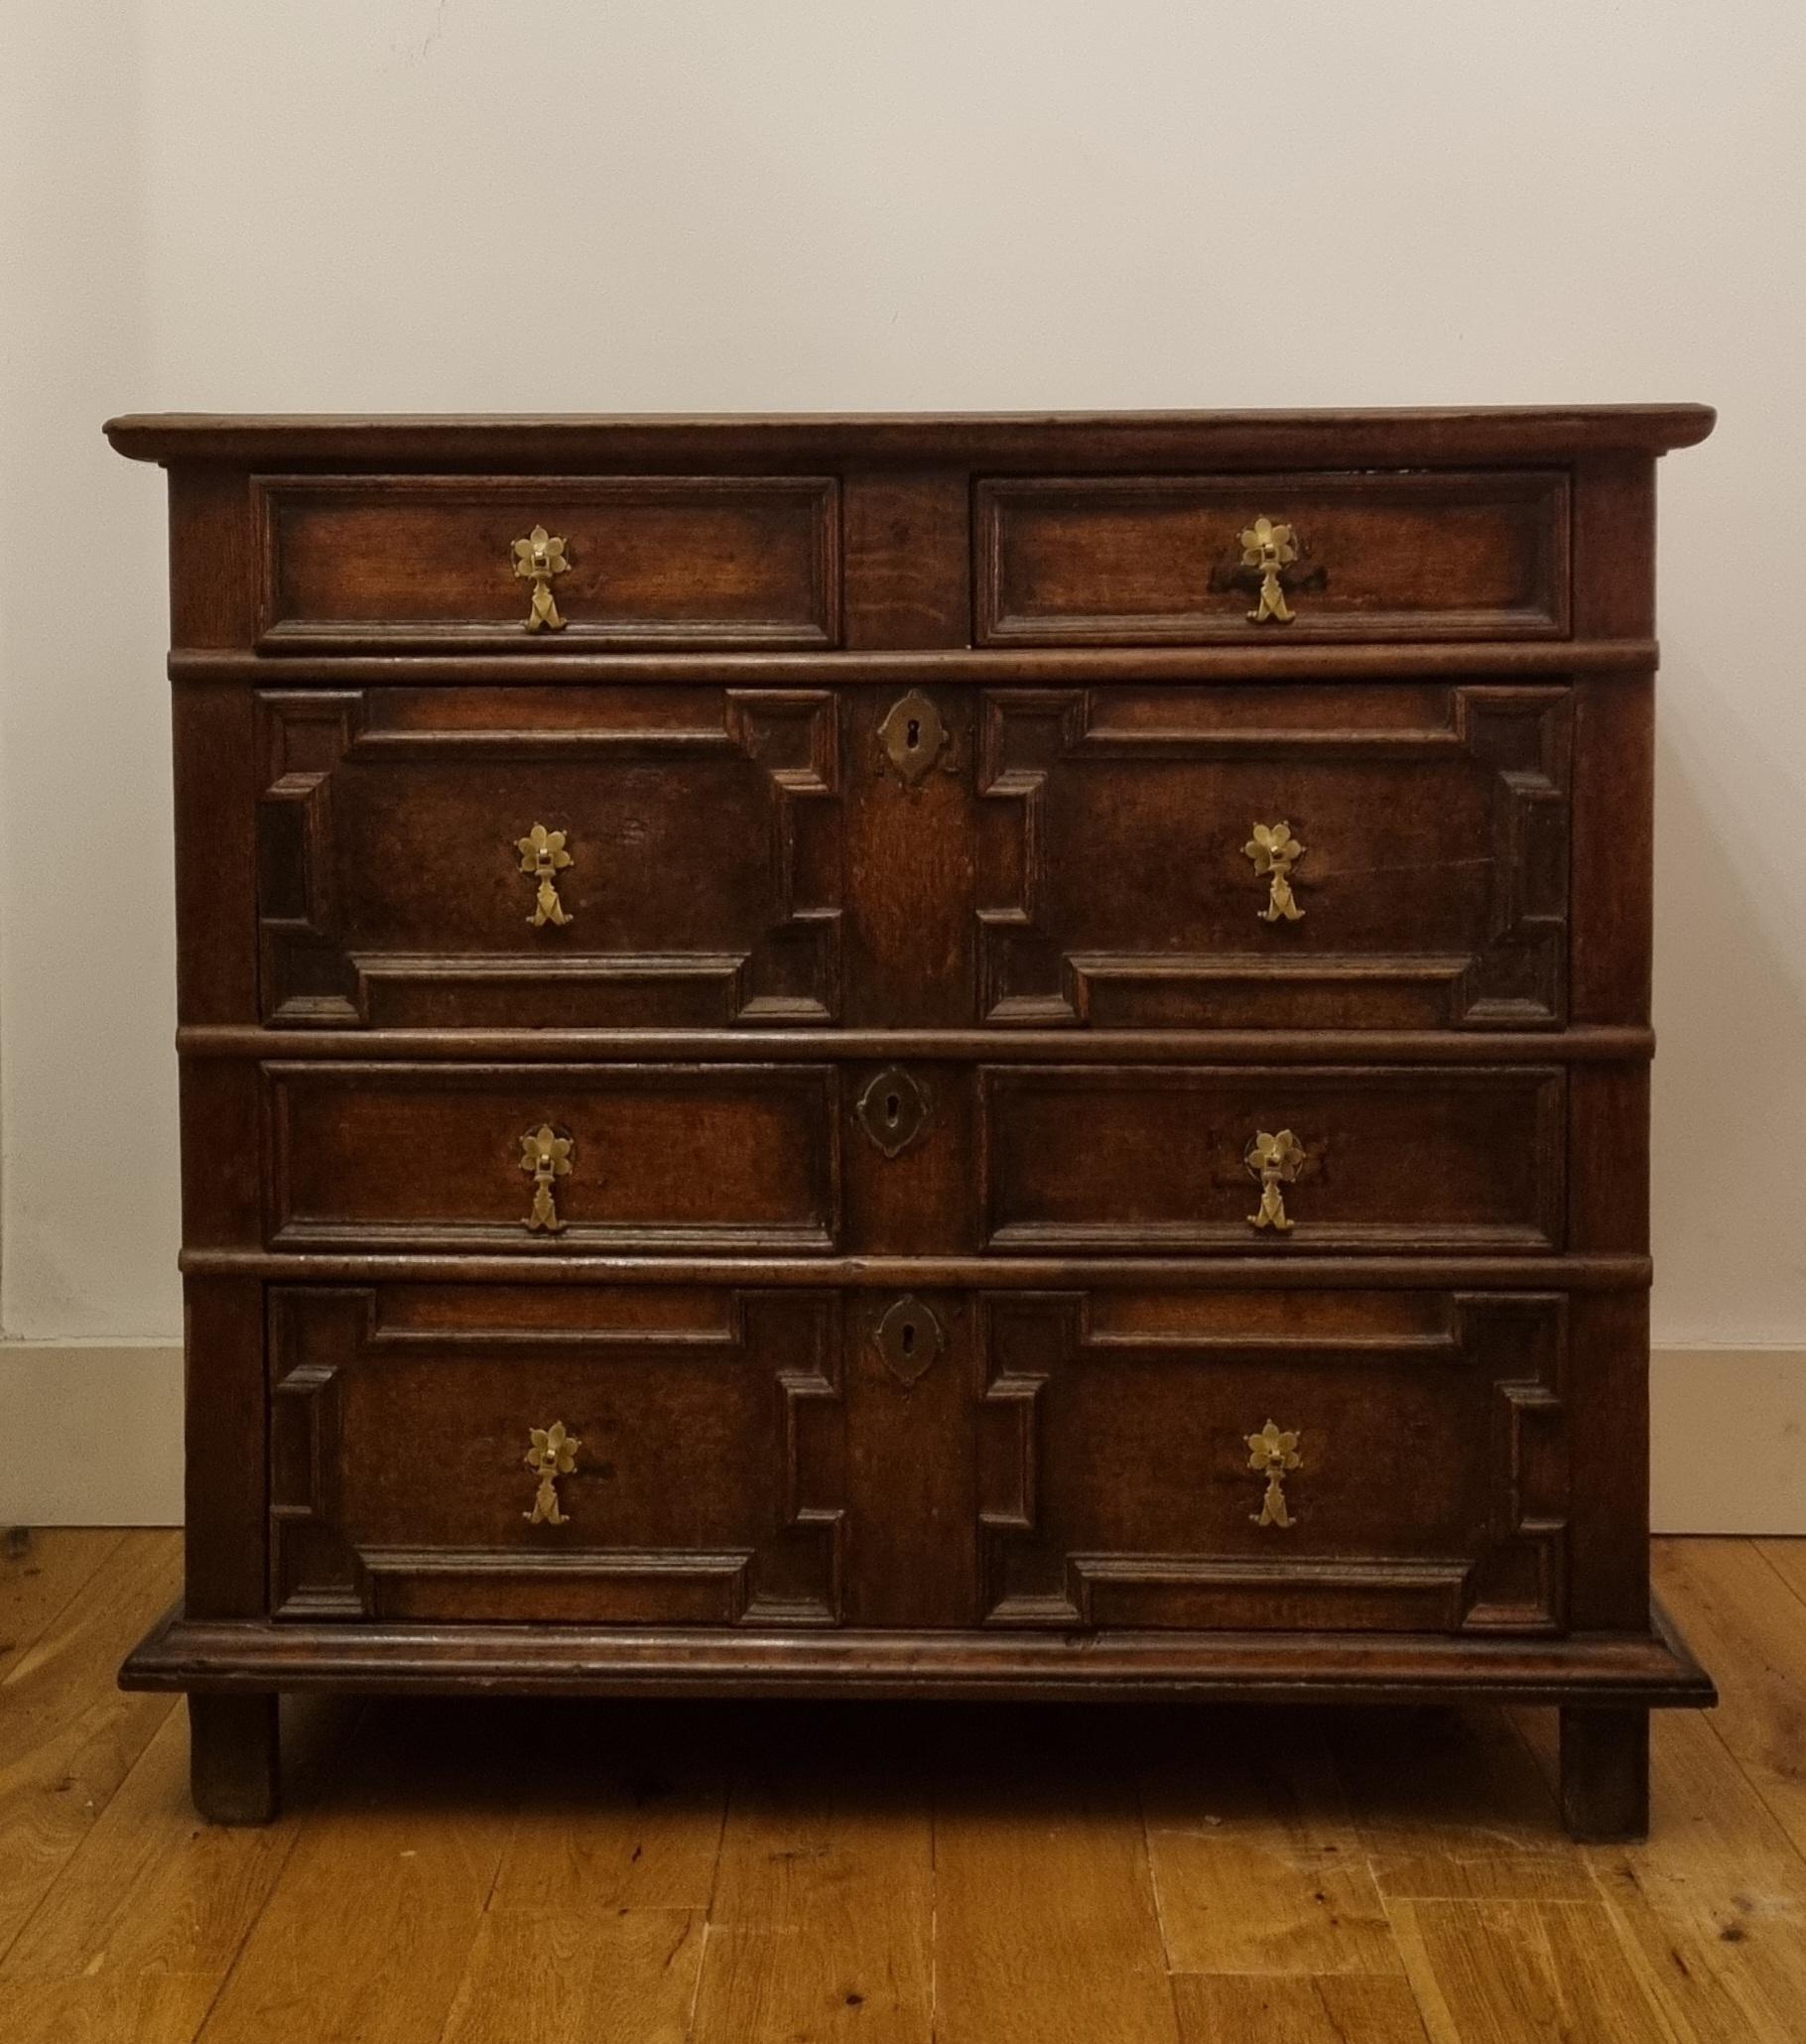 A 17th-century English oak geometric chest of drawers, circa 1680. 

A nice quality chest and boasting a warm colour and patina . The chest has four long drawers with brass fish-tail drop handles, geometric moldings to the drawer fronts, oak